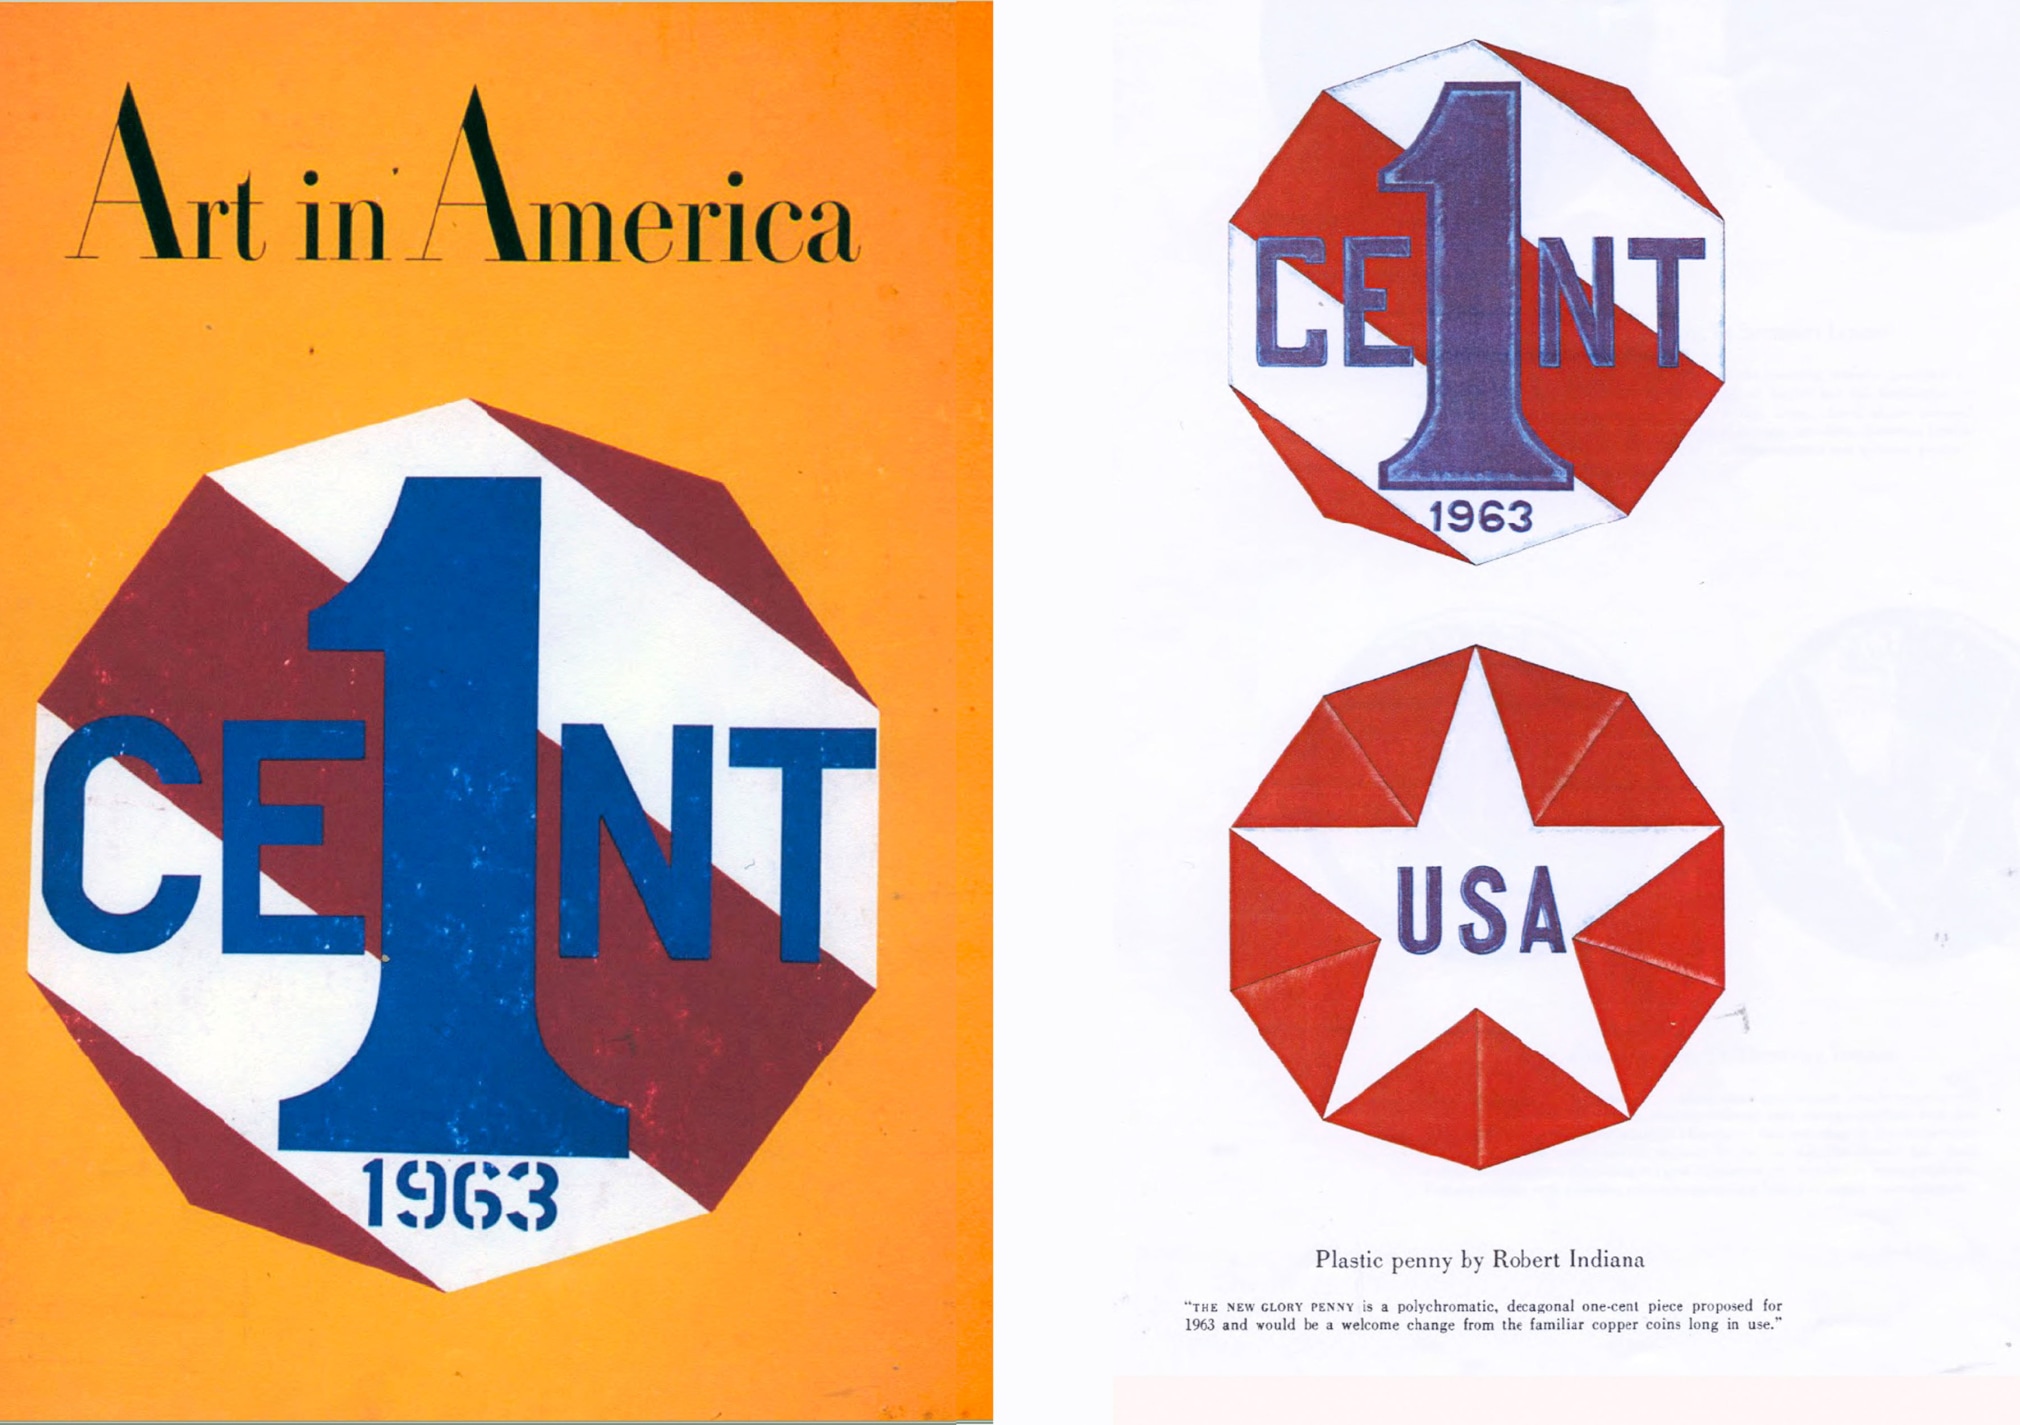 Indiana&rsquo;s New Glory Penny (1963) on the cover of Art in America, April 1963, and depictions of the coin, obverse and reverse, in a full-page illustration in the interior